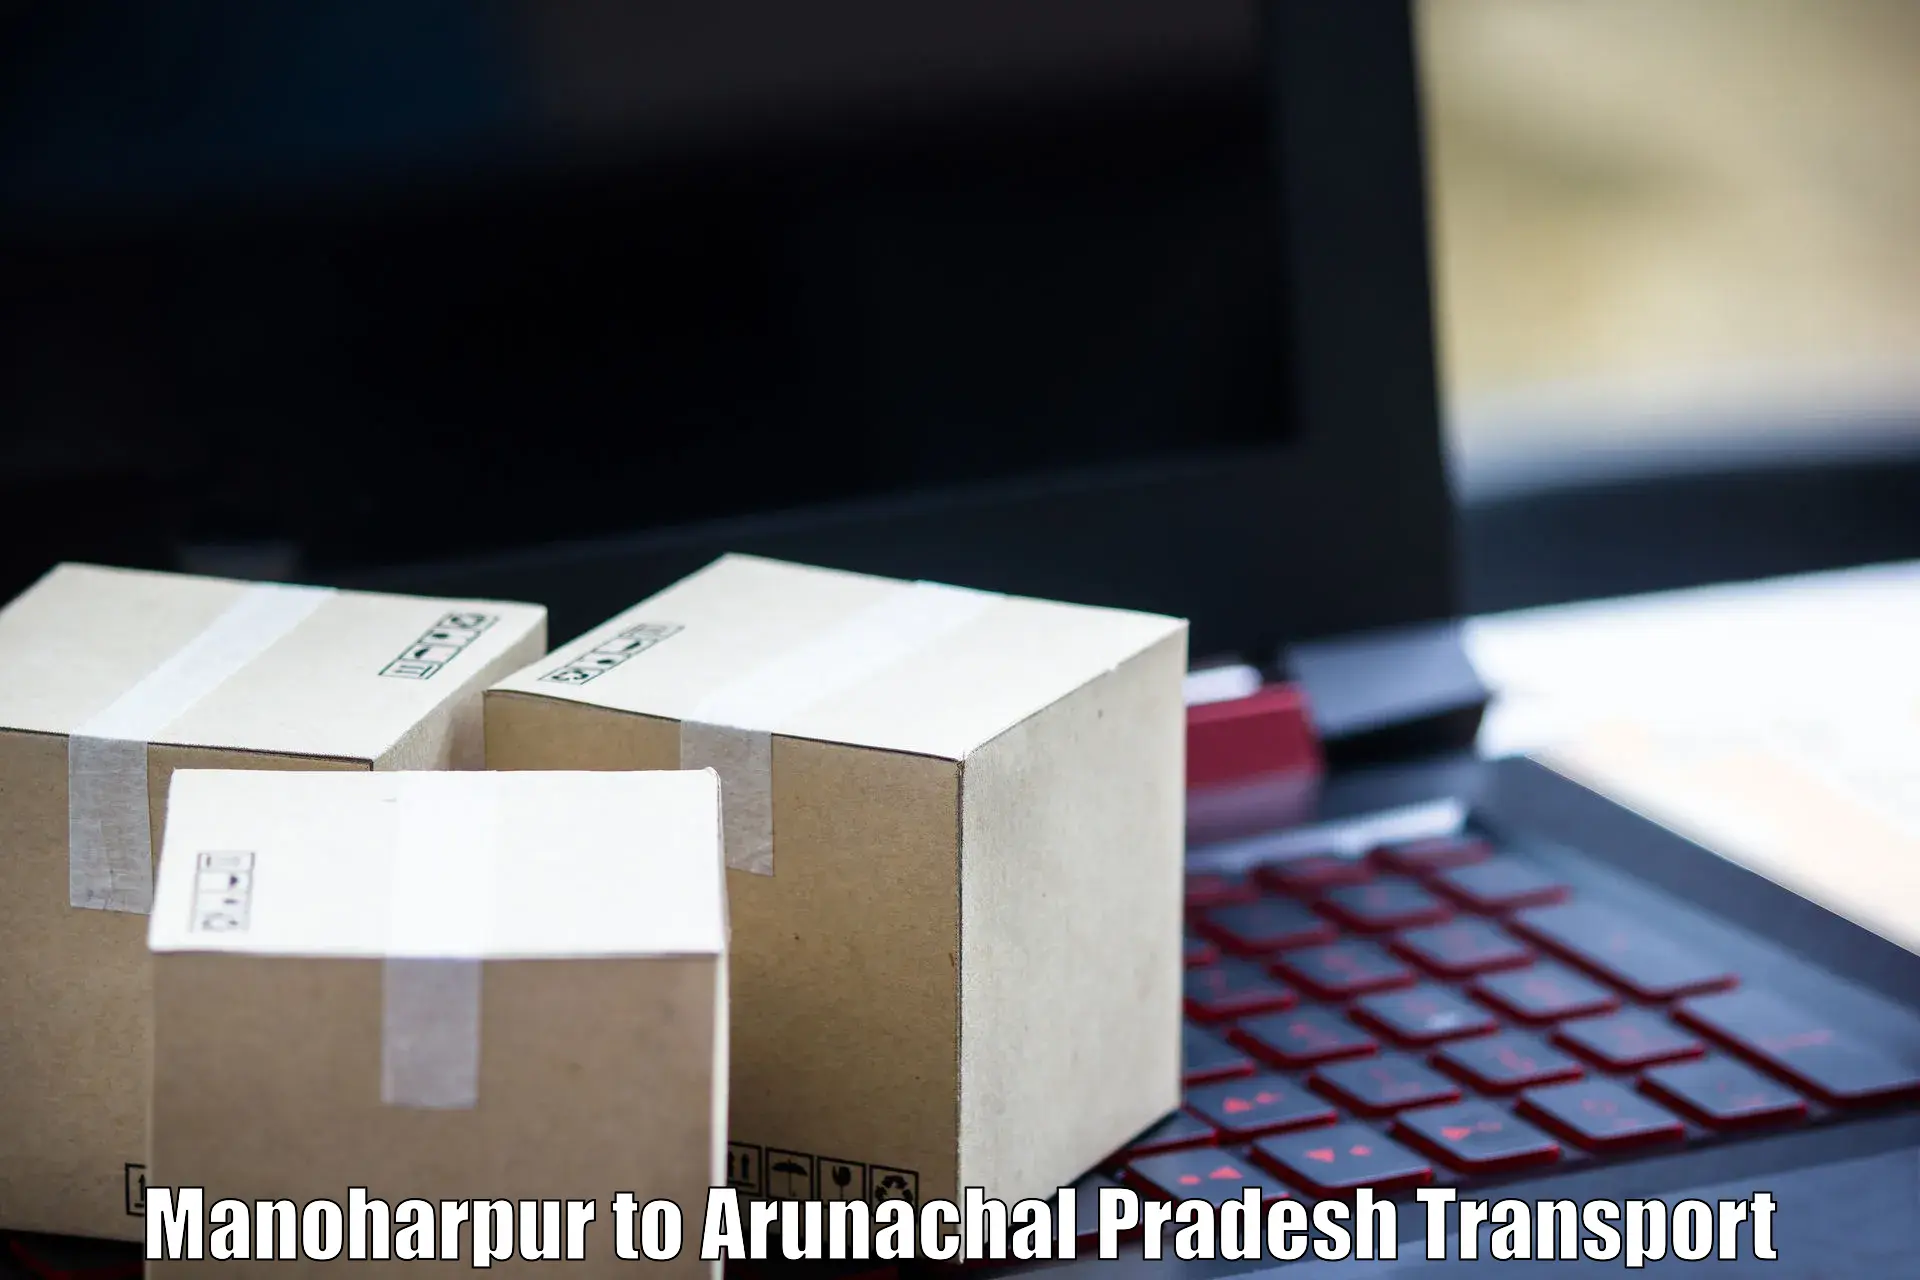 Land transport services in Manoharpur to Namsai